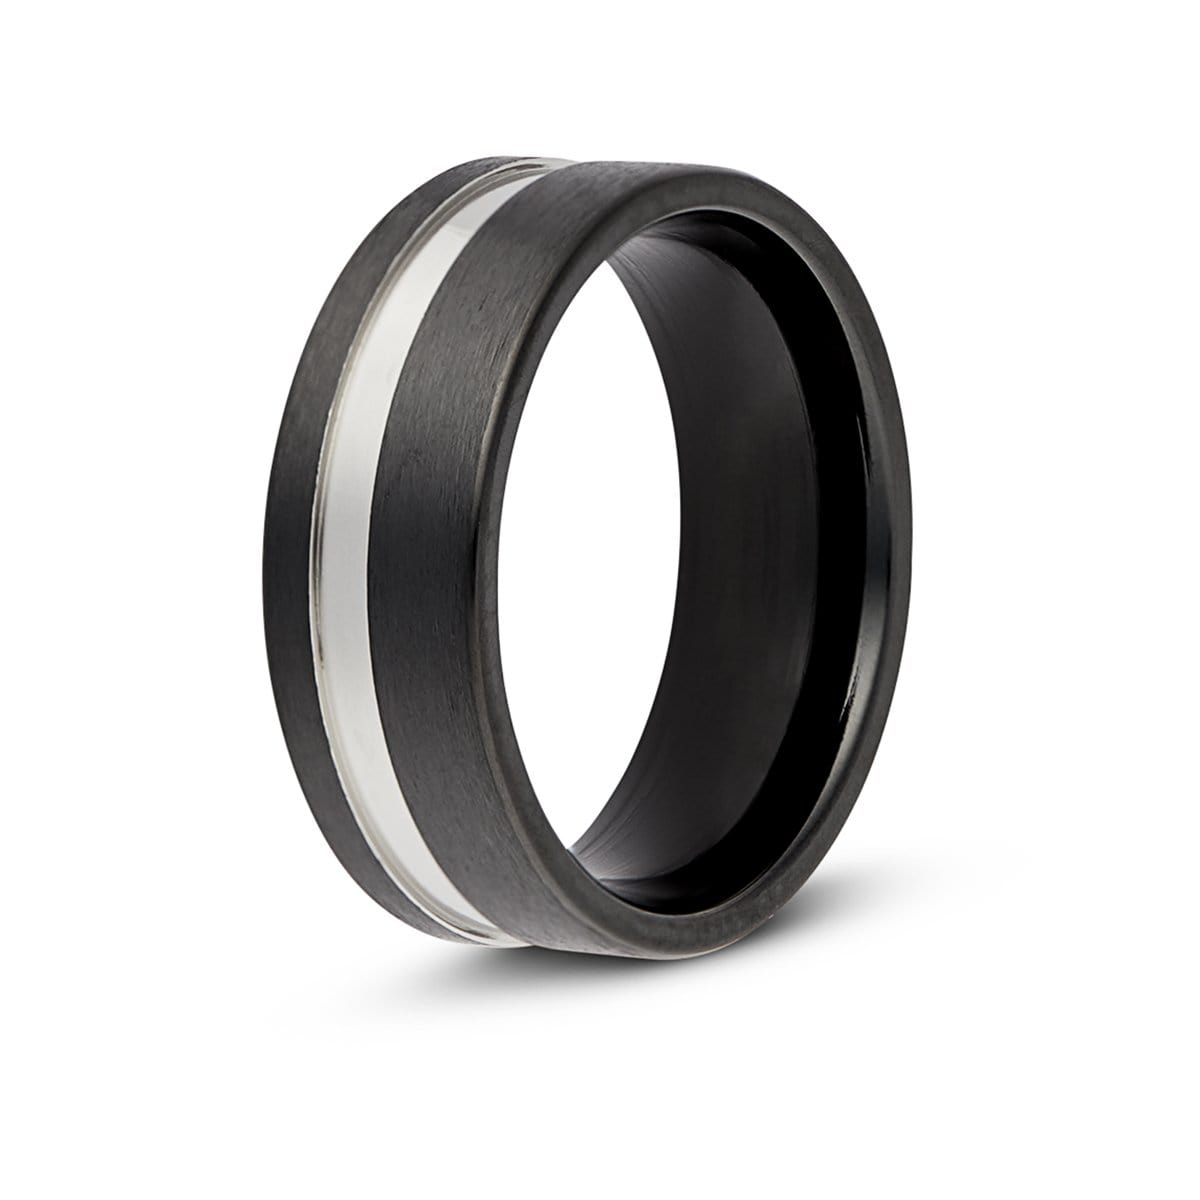 BLACK WITH GOLD STRIPE SILICONE RING